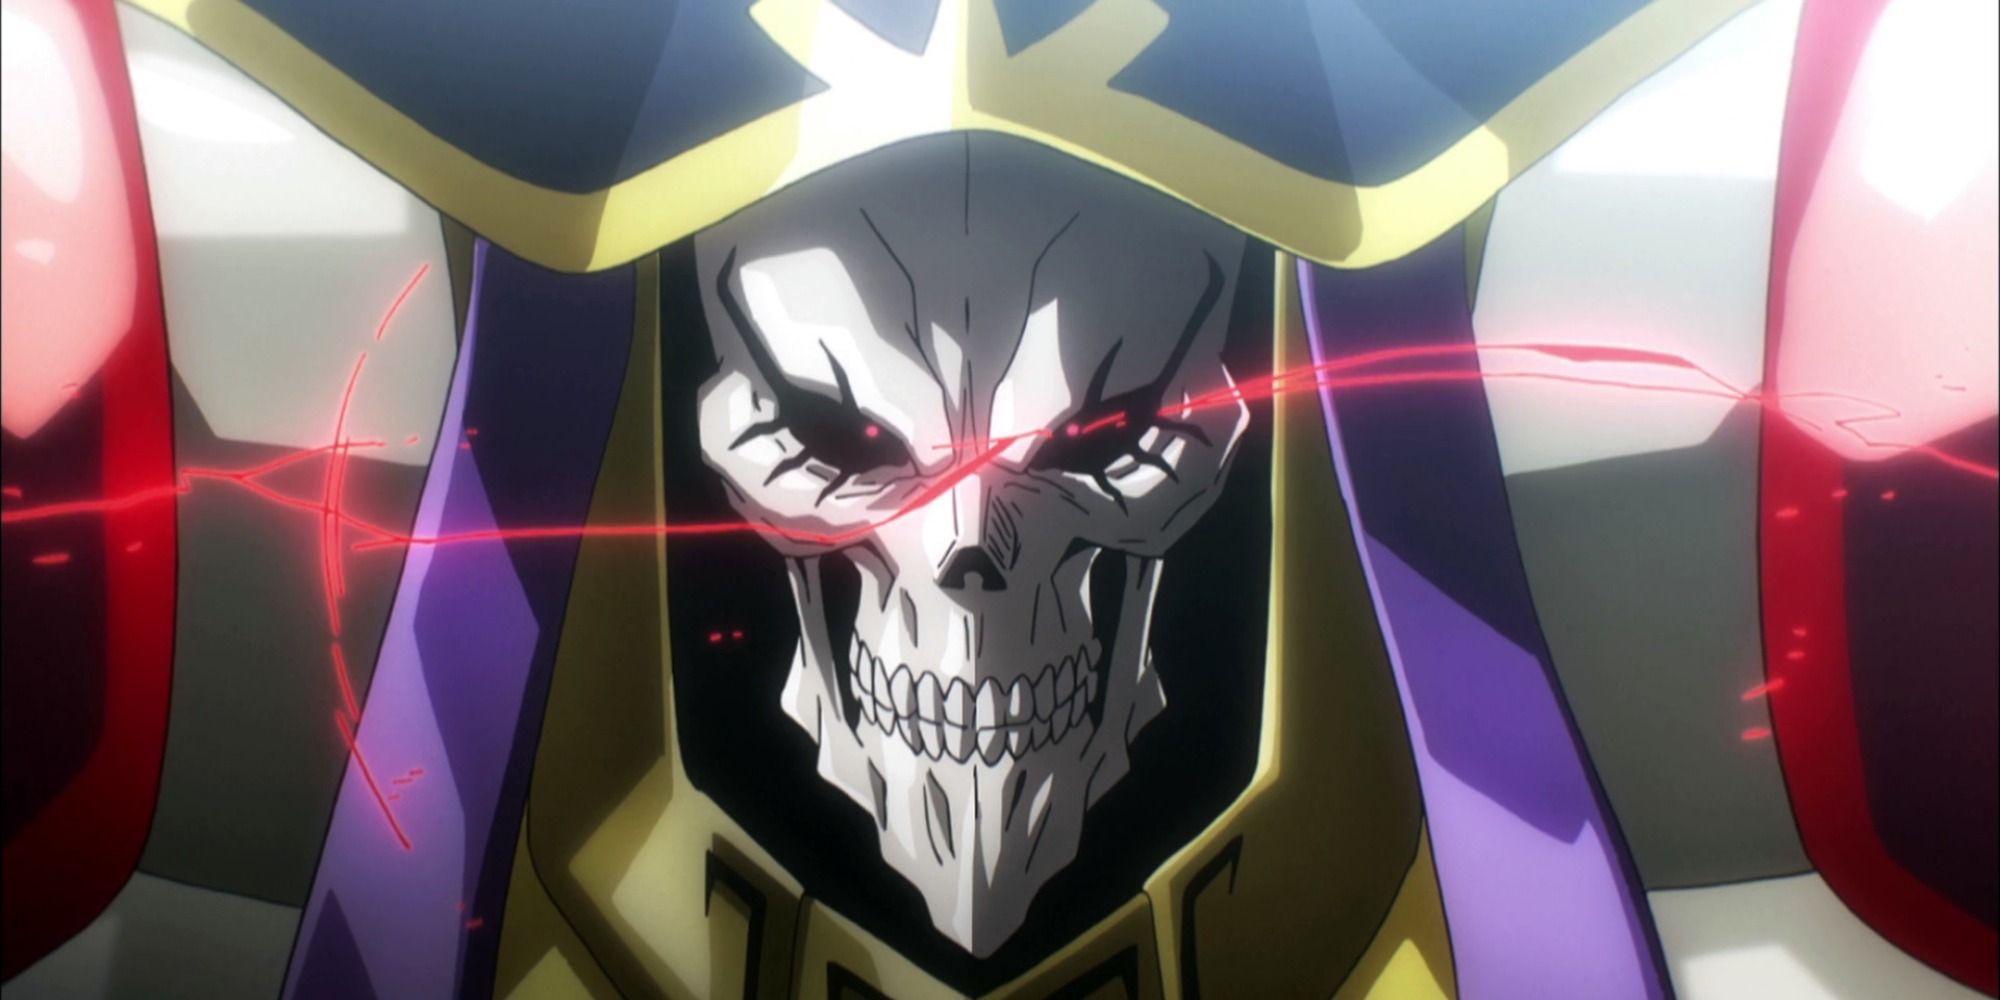 Overlord: Ainz Ooal Gown's Most Powerful Abilities